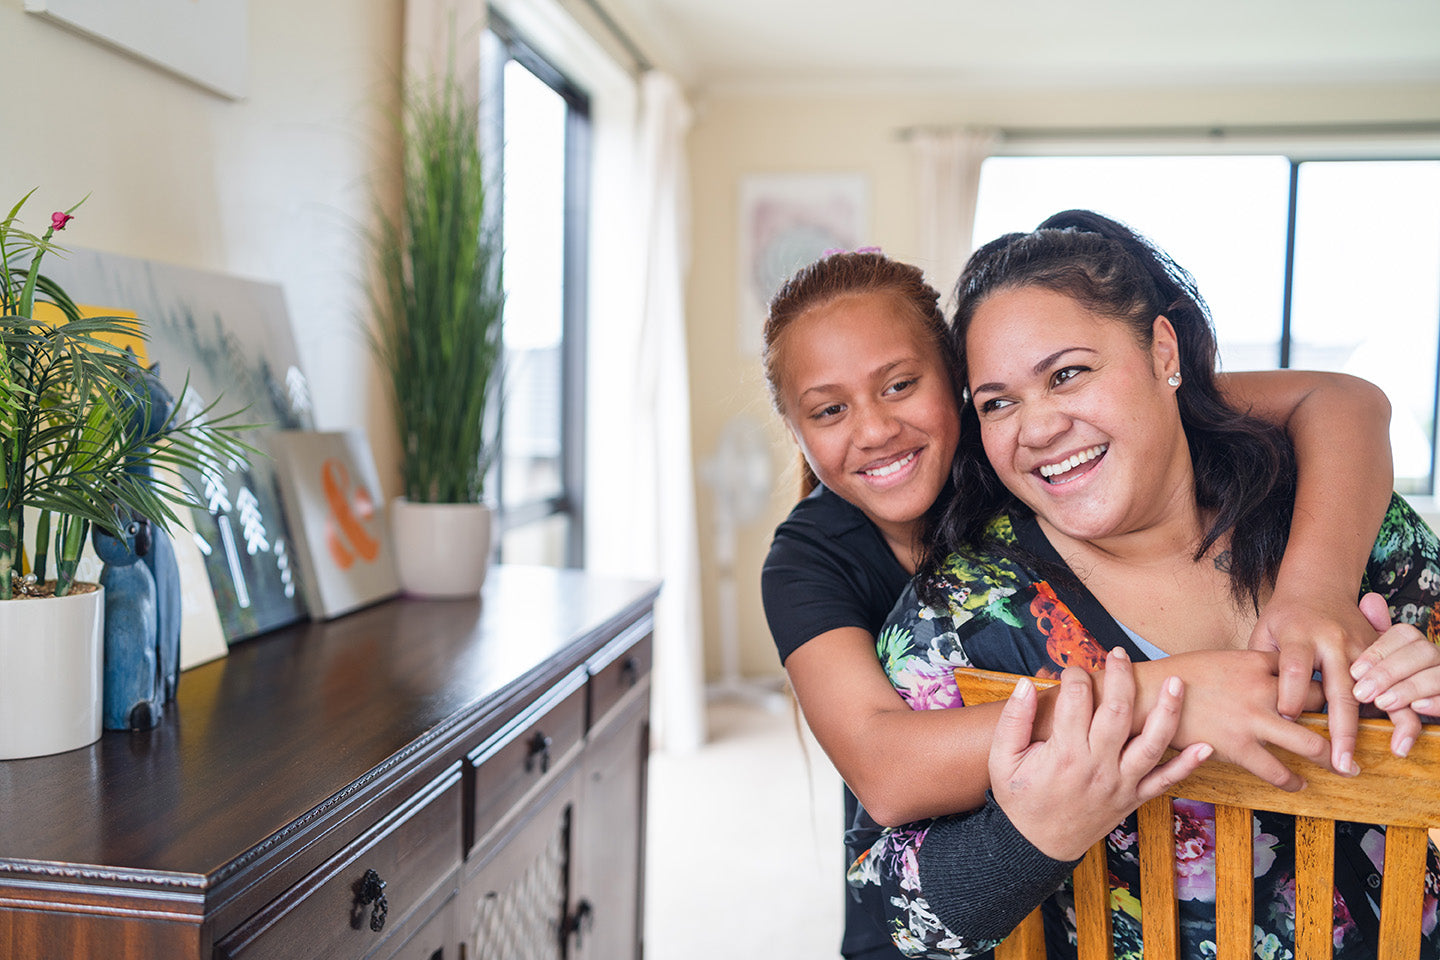 Two young female family members smiling and hugging each other in their home